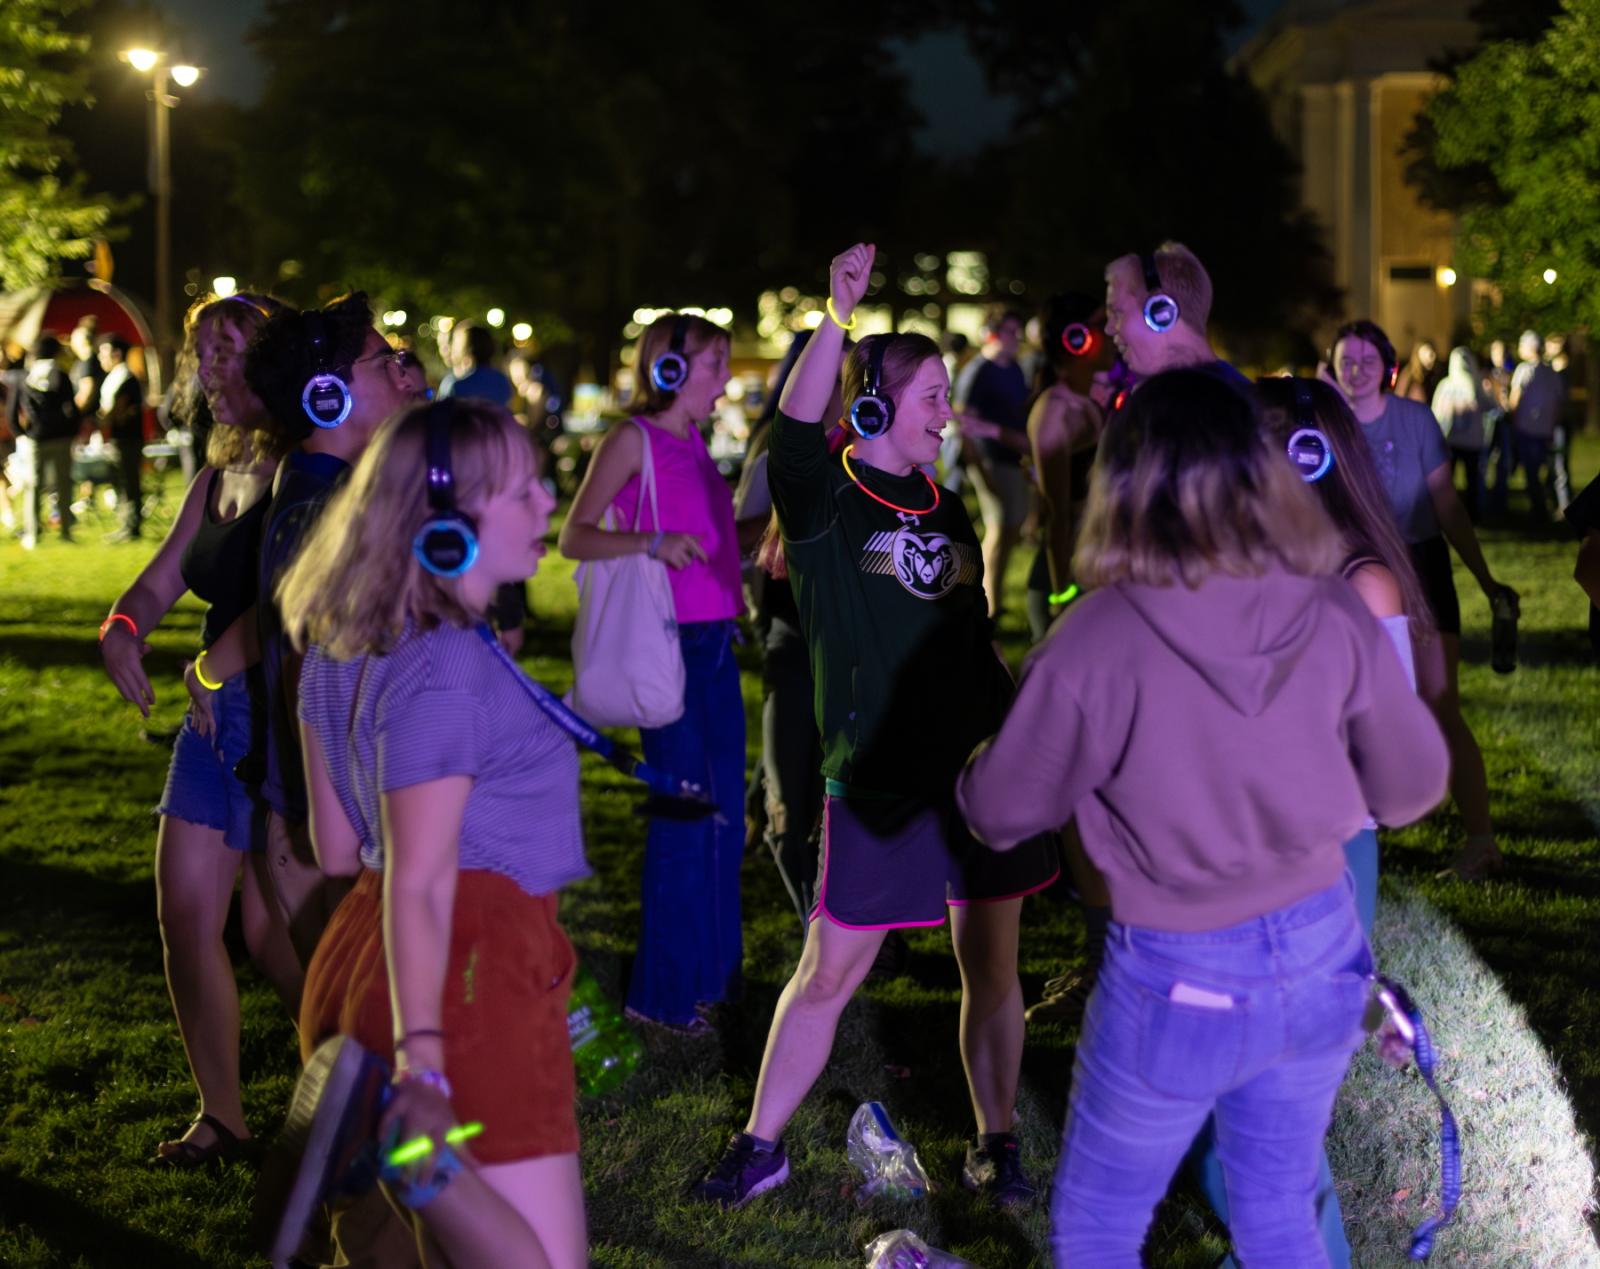 Students dance together while listening to headphones as part of a silent disco event on Main Hall Green.